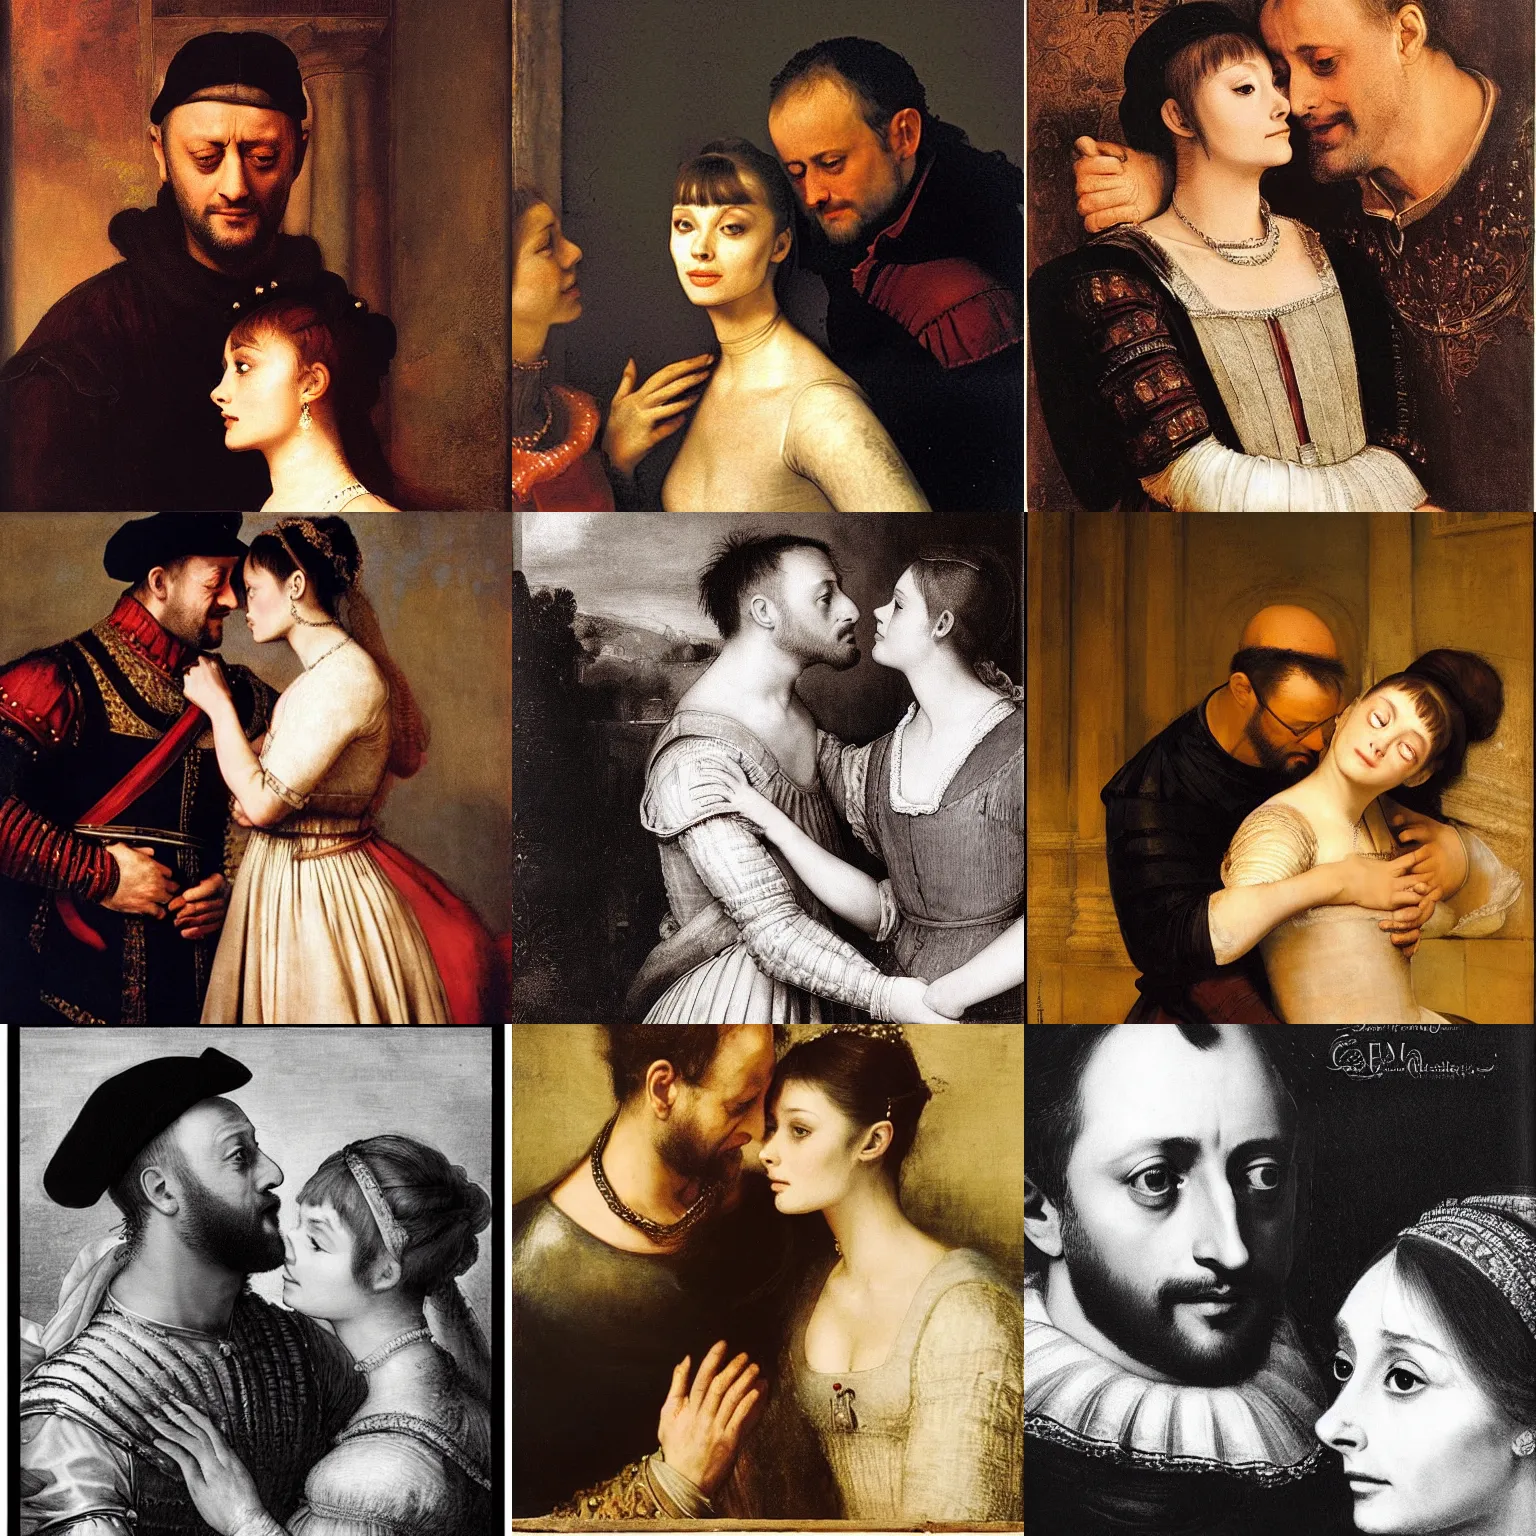 Prompt: In the 15th century Romeo (Jean Reno) and Juliet (Audrey Hepburn), are looking at each other romantically. tragic, ((restrained)), lumnious, ((stage lights)), 18th theater poster by Rembrandt